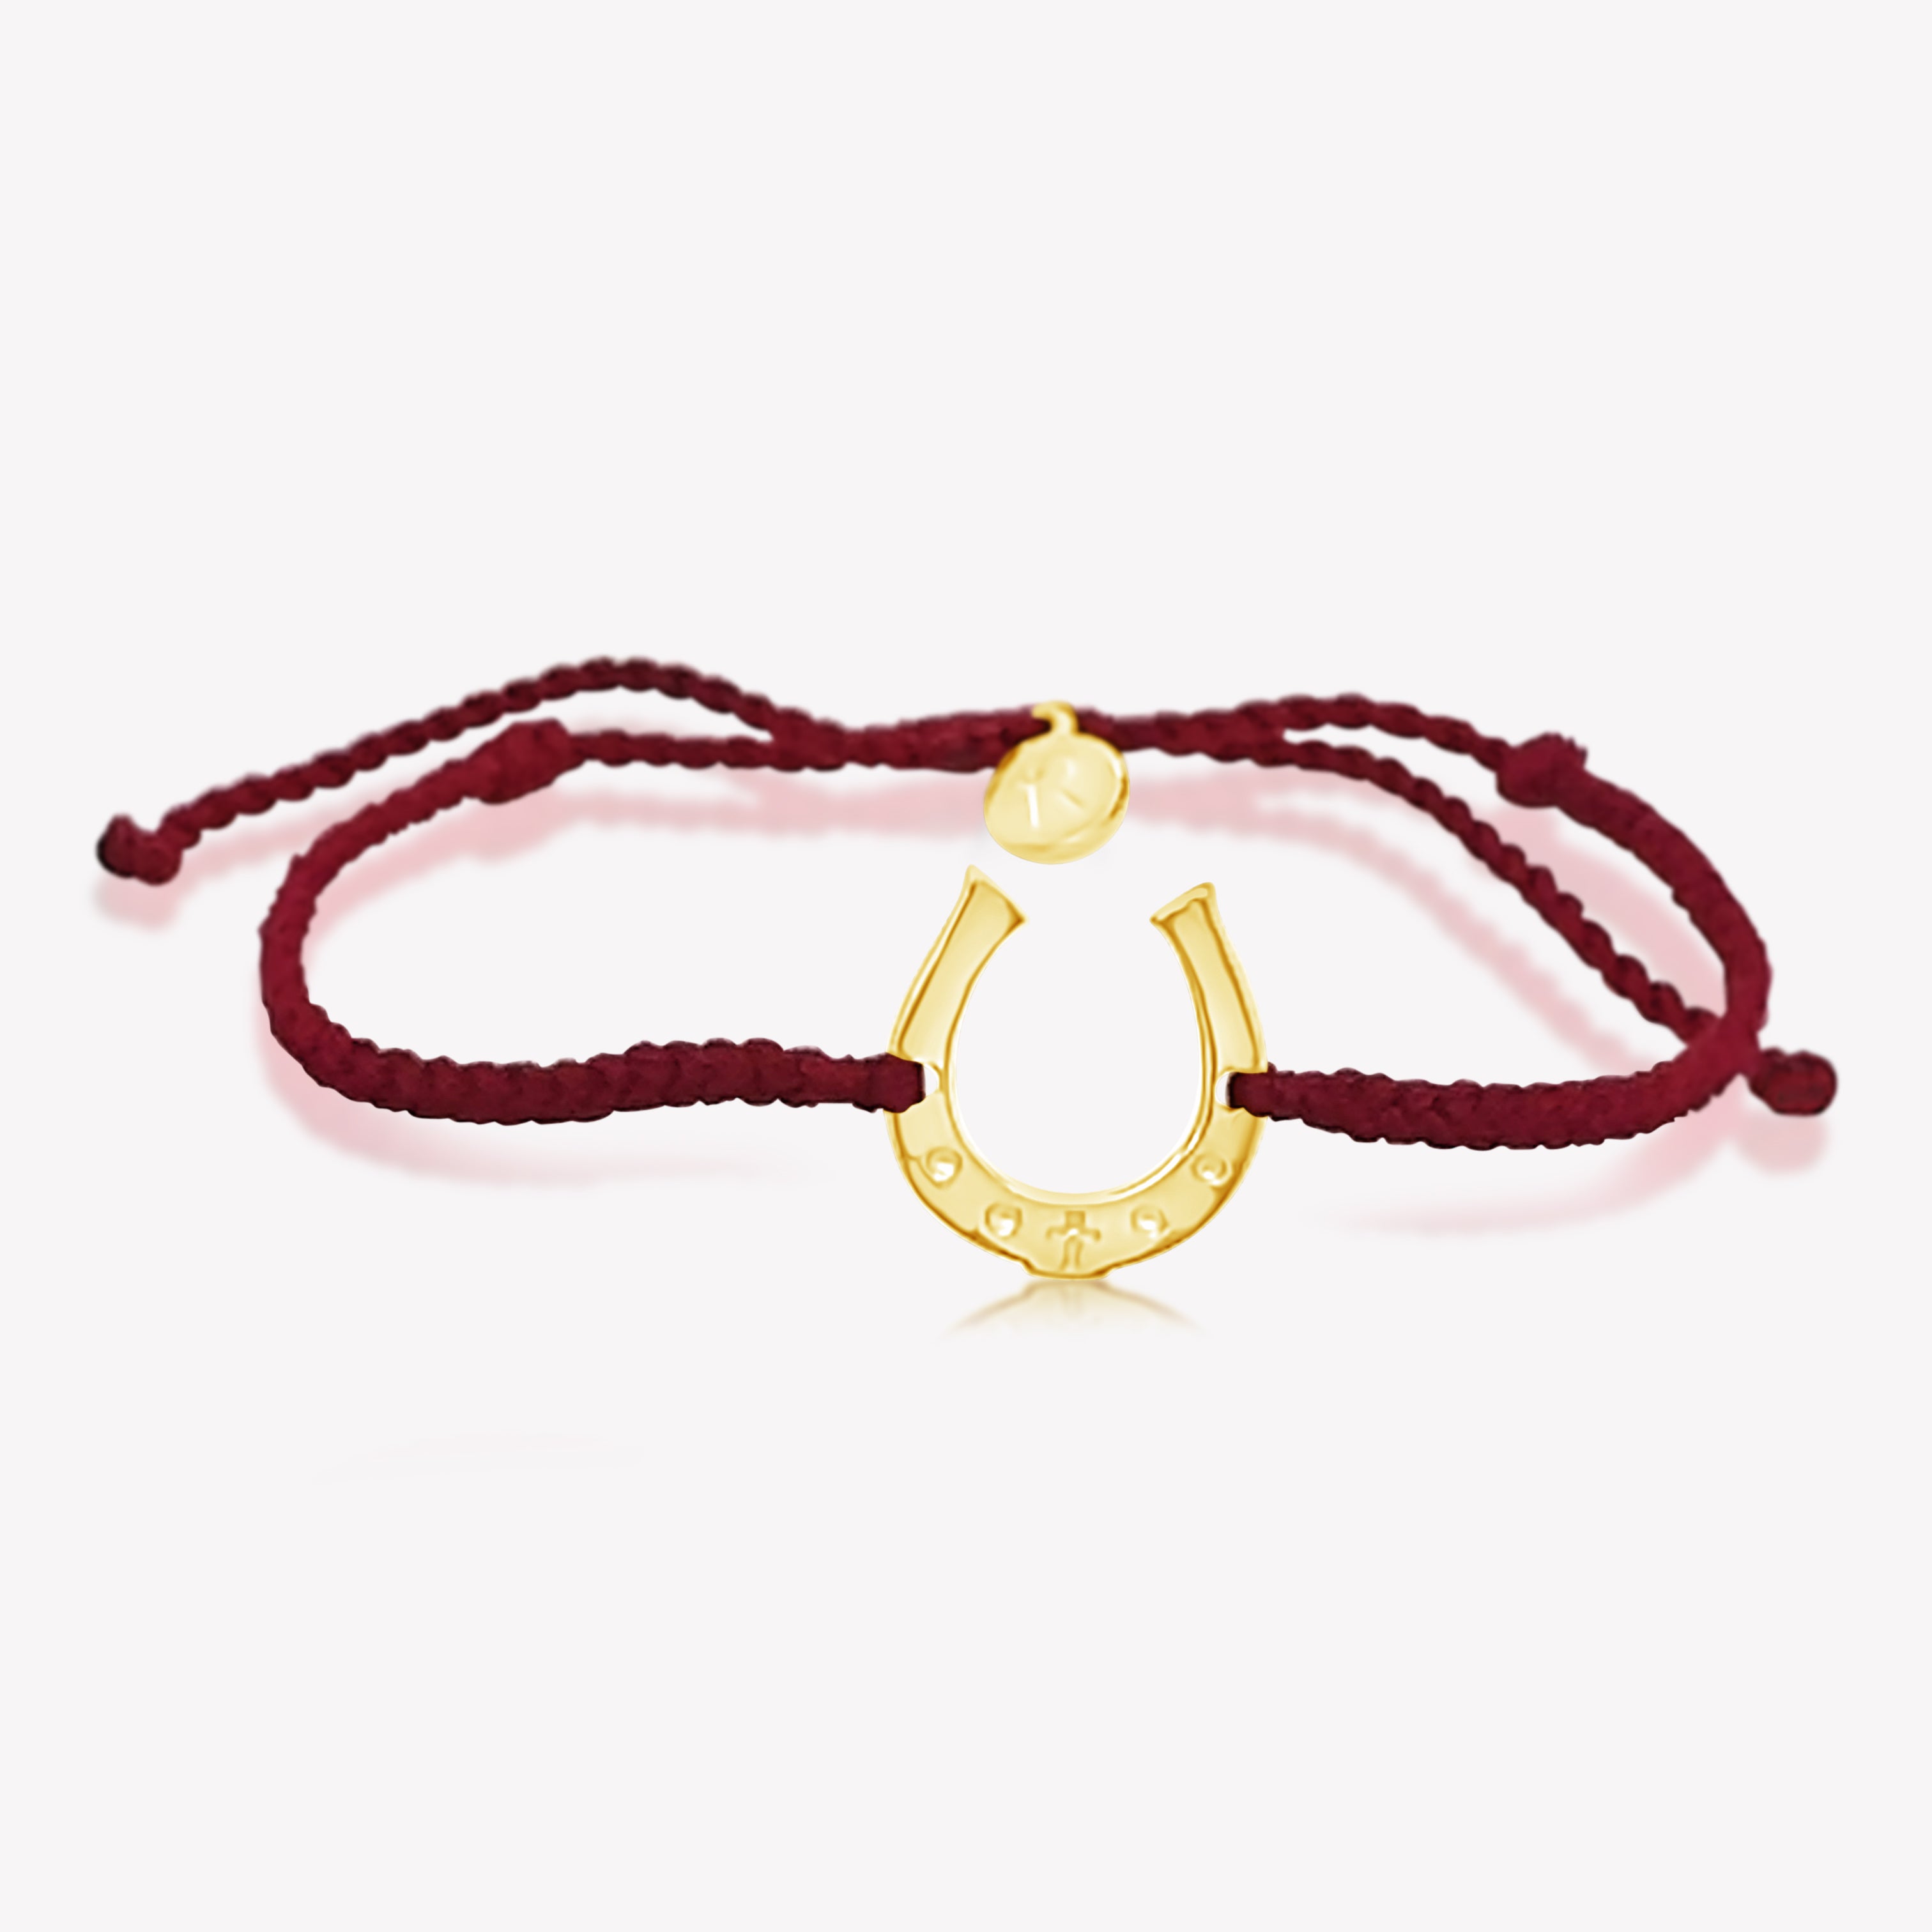 Close up of limited edition red cord friendship bracelet featuring a horseshoe pendant in gold from the Made4Ministry Collection by Rizen Jewelry benefitting Big Oak Ranch.